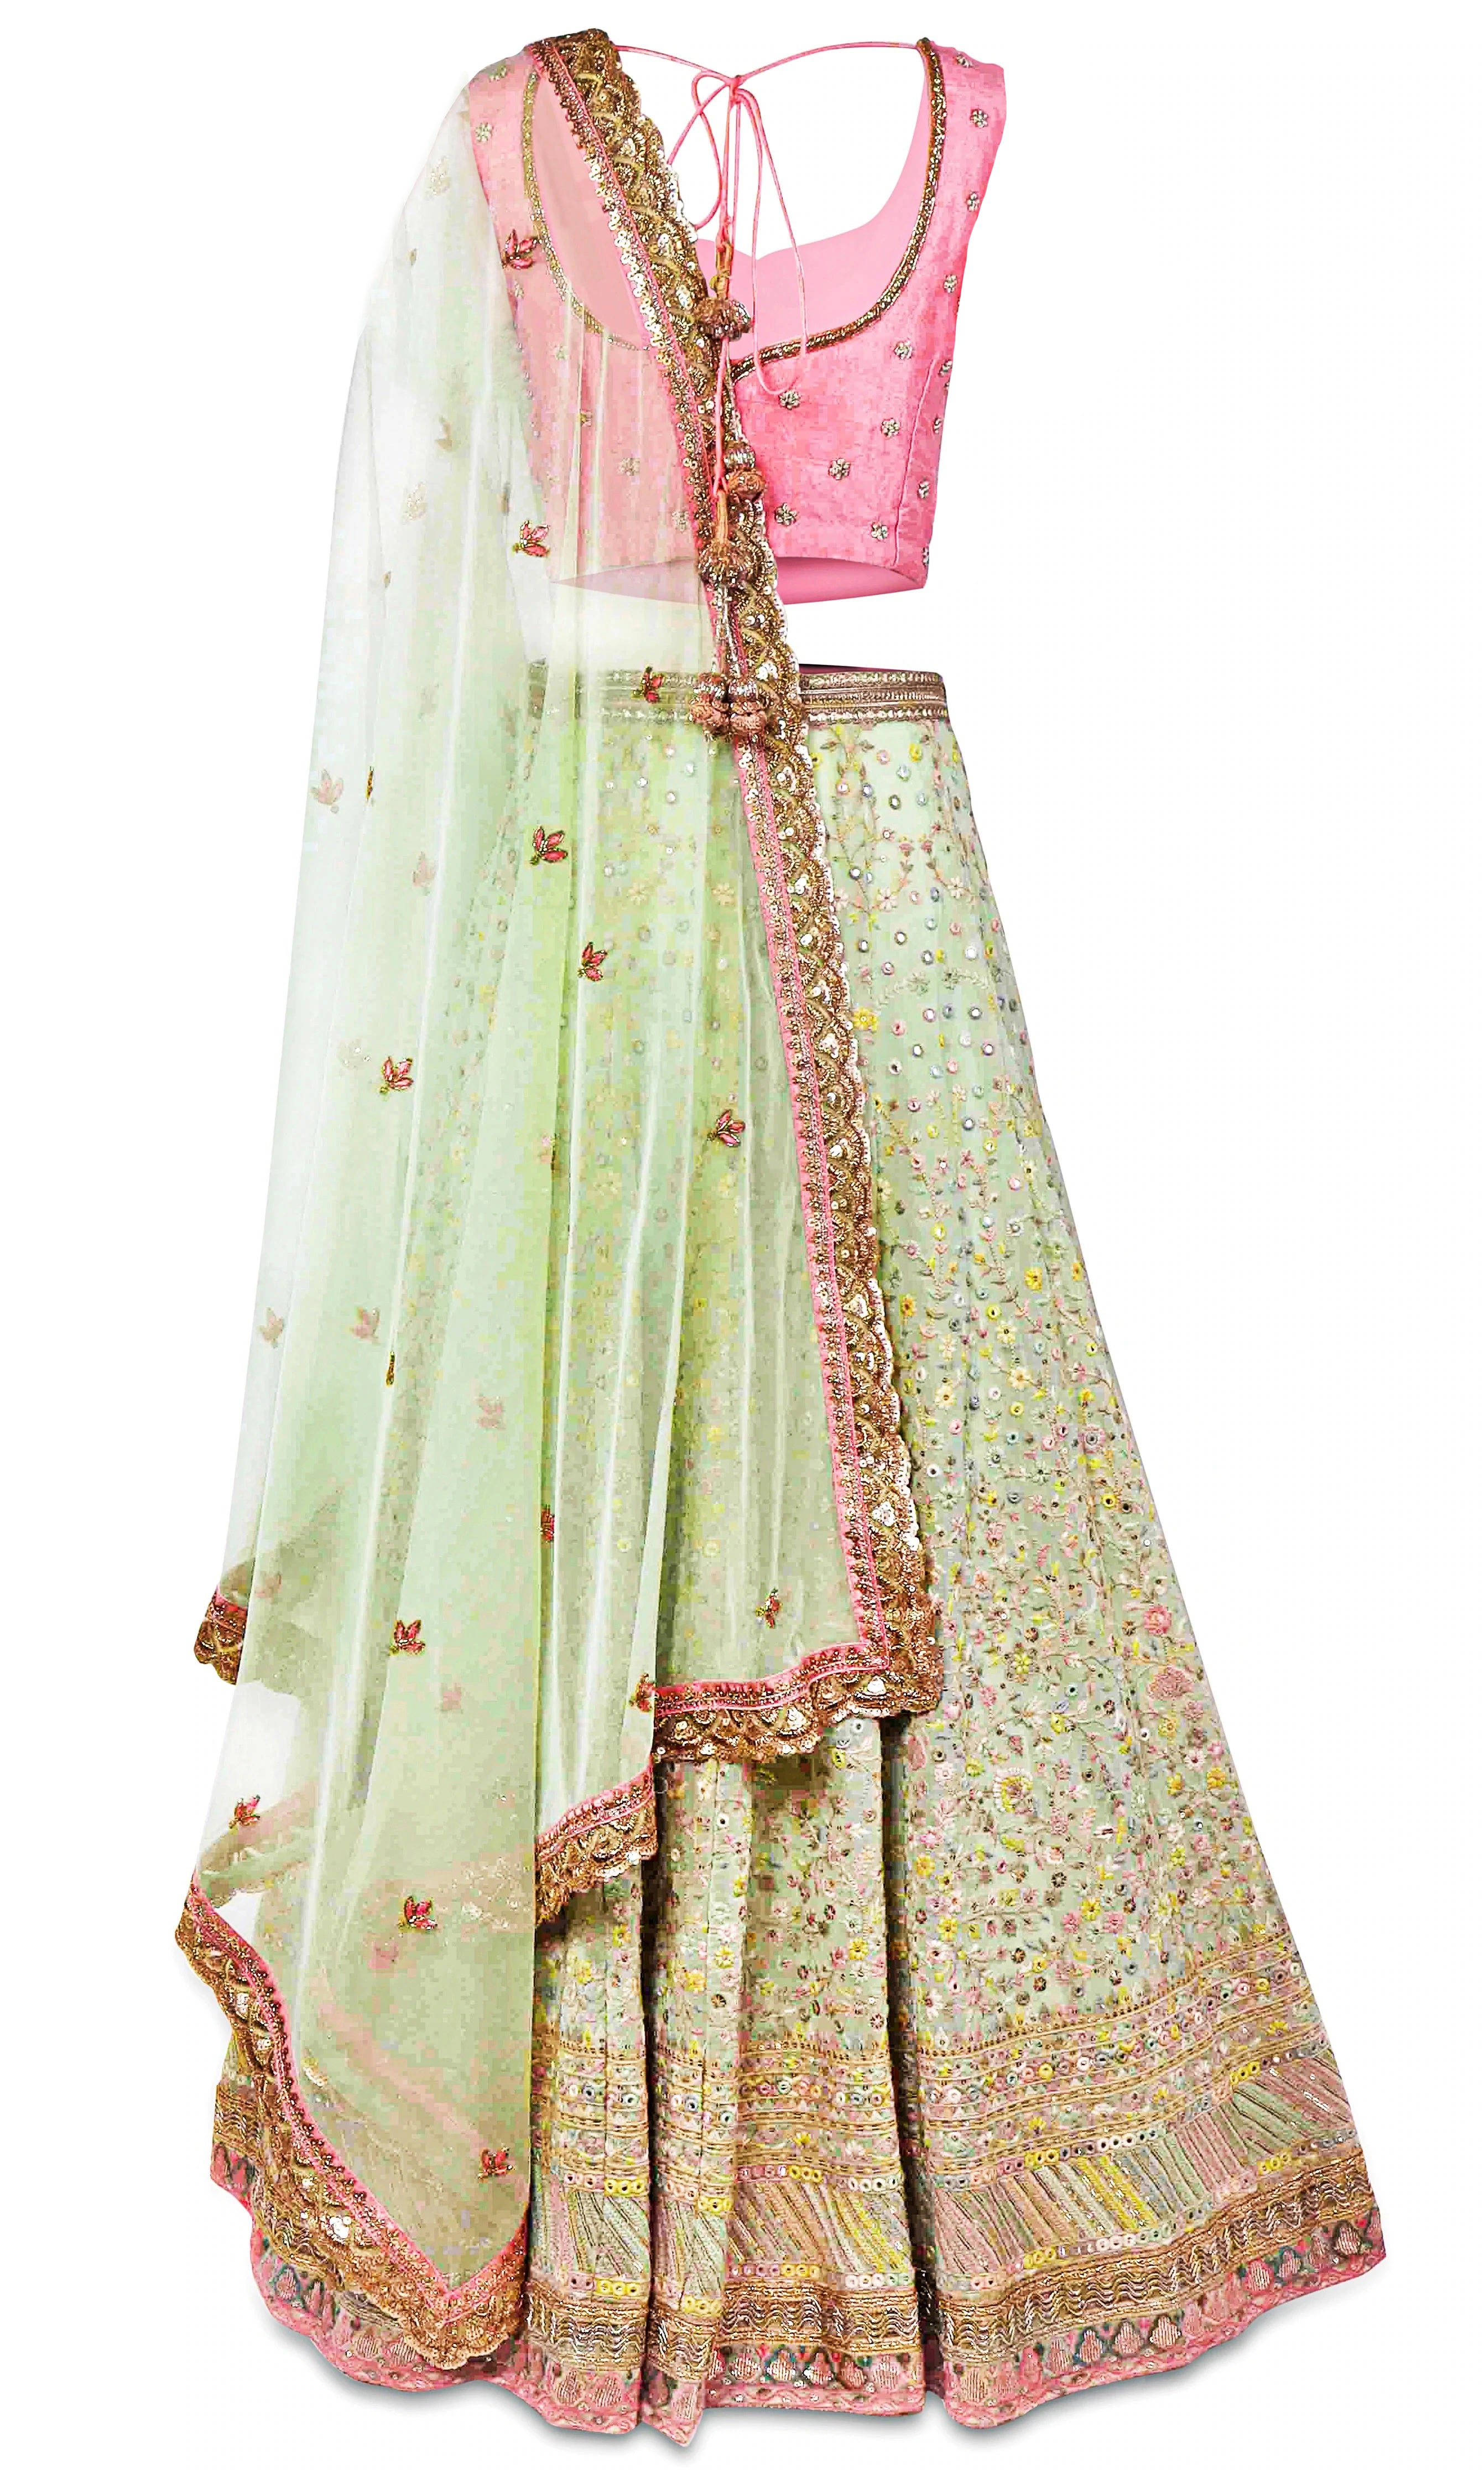  Designer Lehenga by Bhumika Grover, paired with a matching pink blouse or net dupatta. 